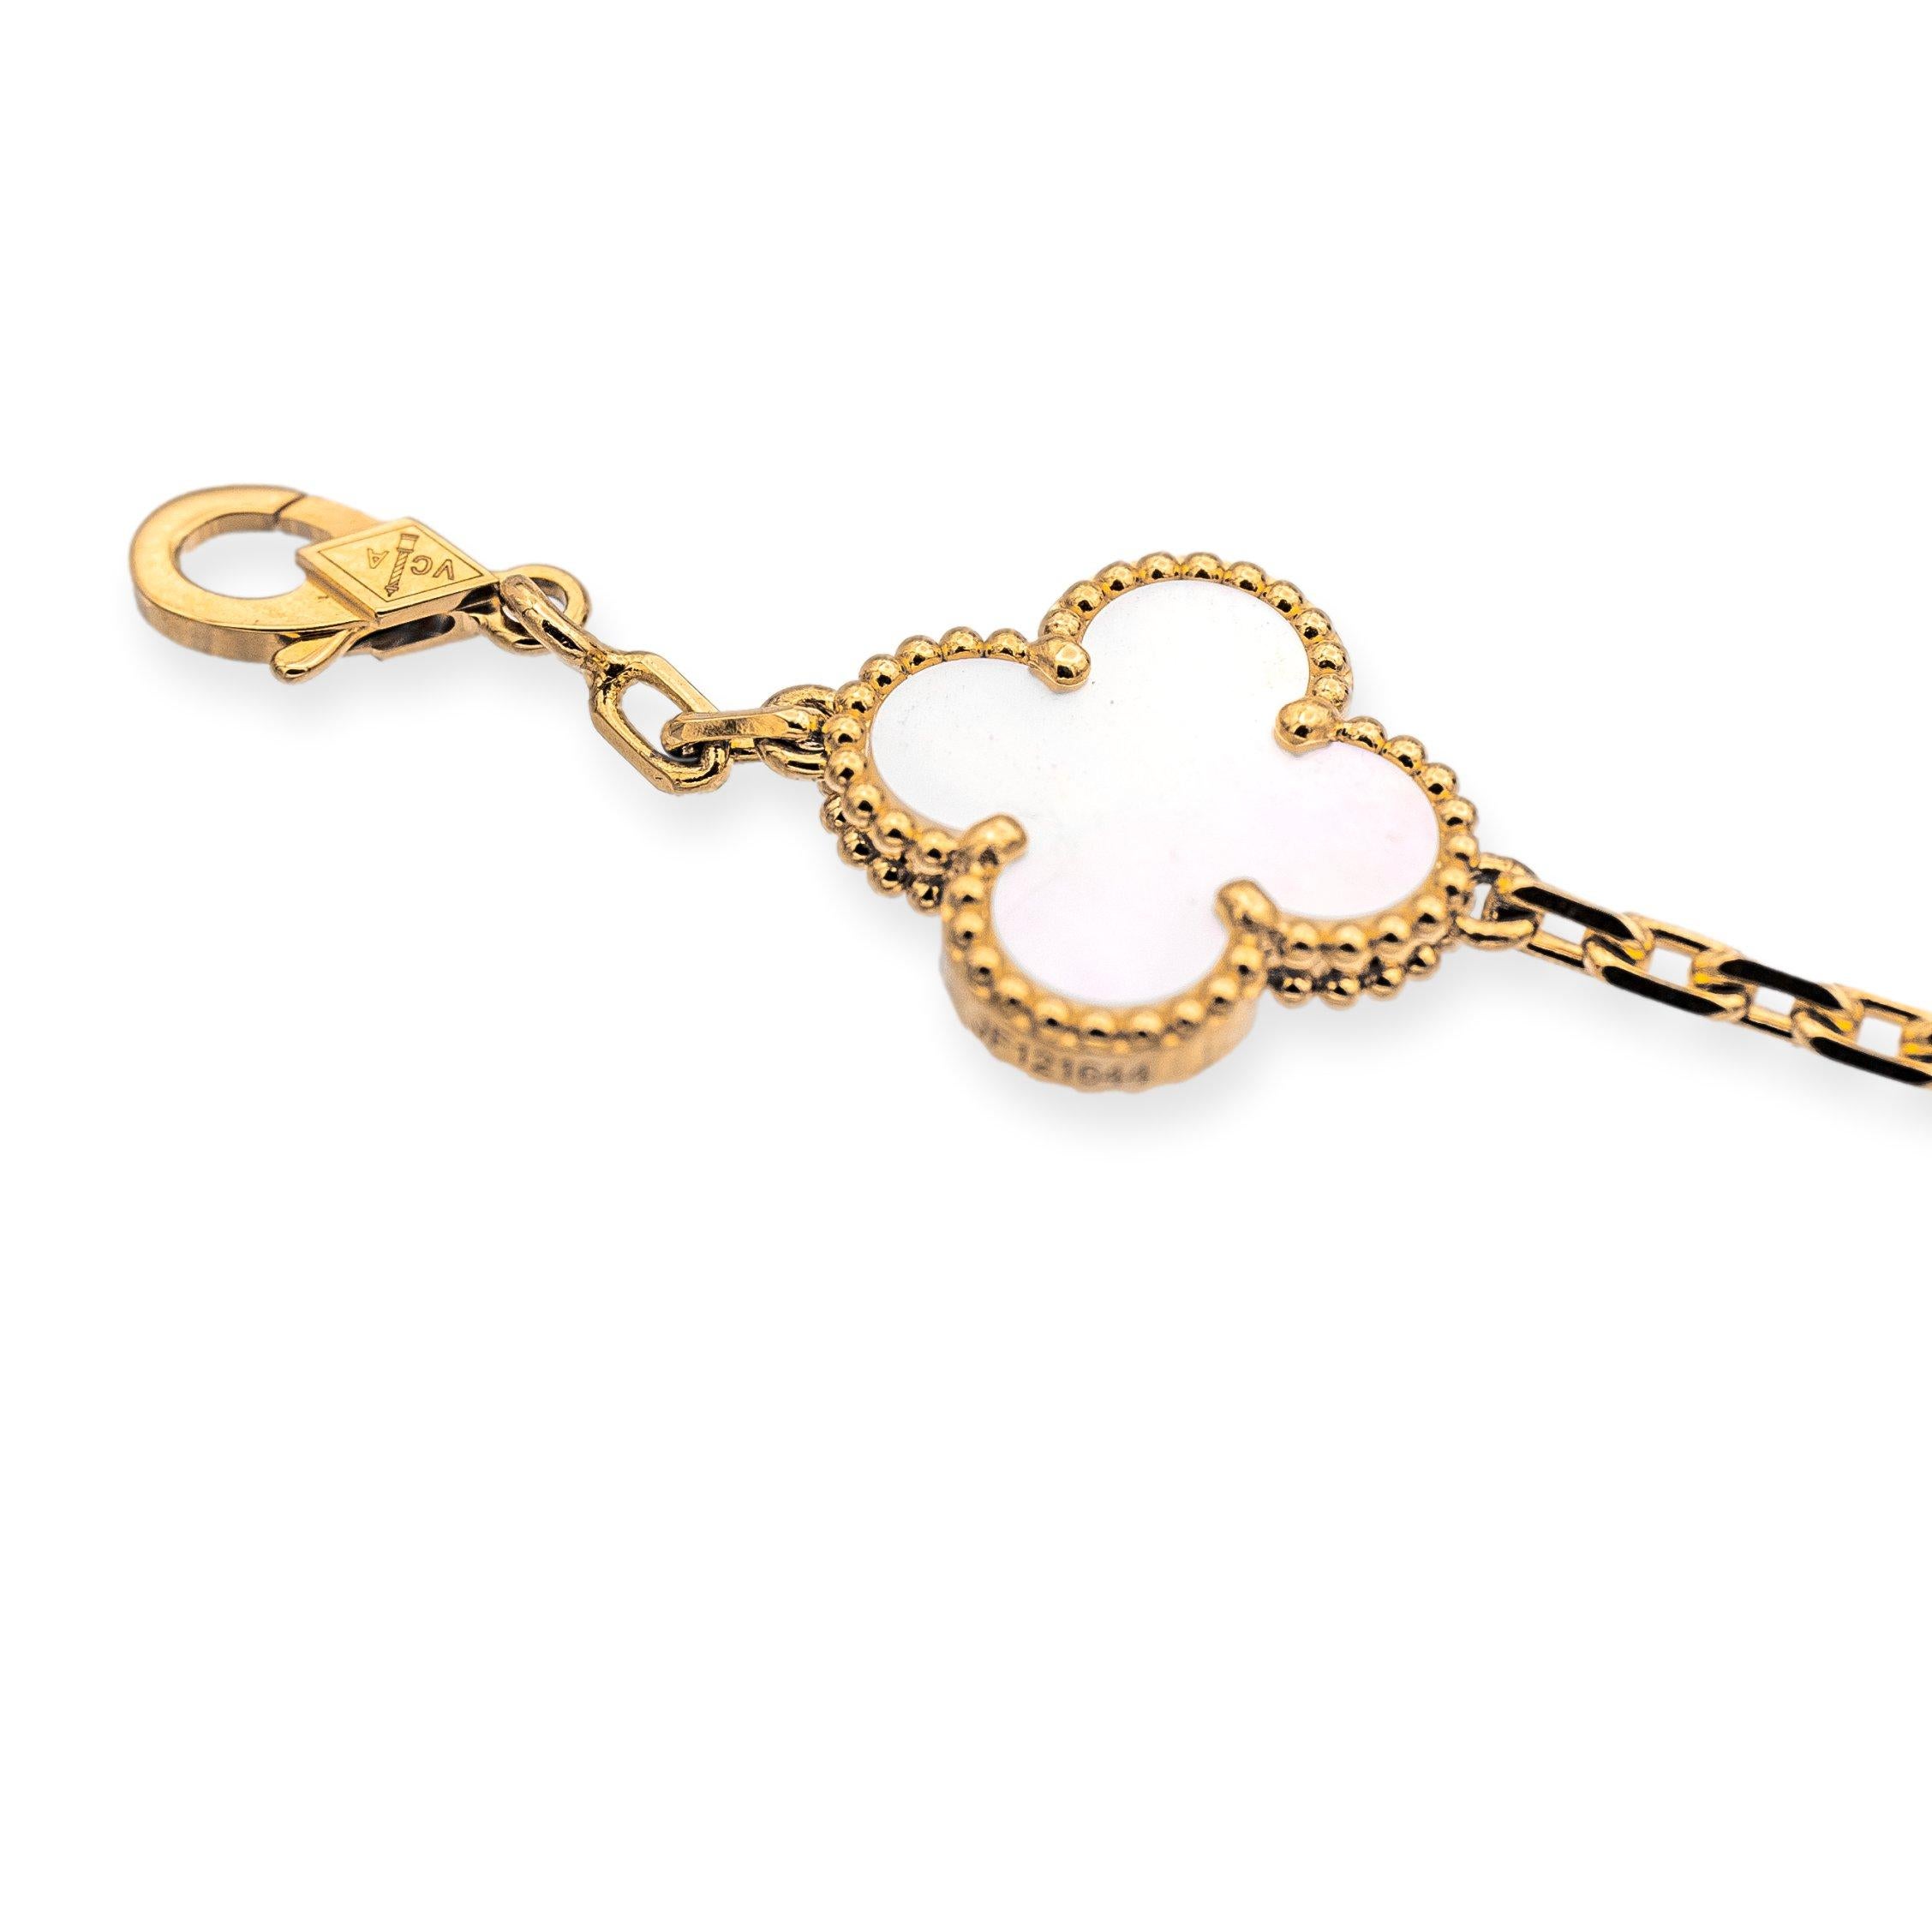 Van Cleef & Arpels bracelet from the Vintage Alhambra collection finely crafted from 18 karat yellow gold. The bracelet measures 7.5 inches long and features five delicate mother of pearl motifs, each set within a gold clover shape, which is the